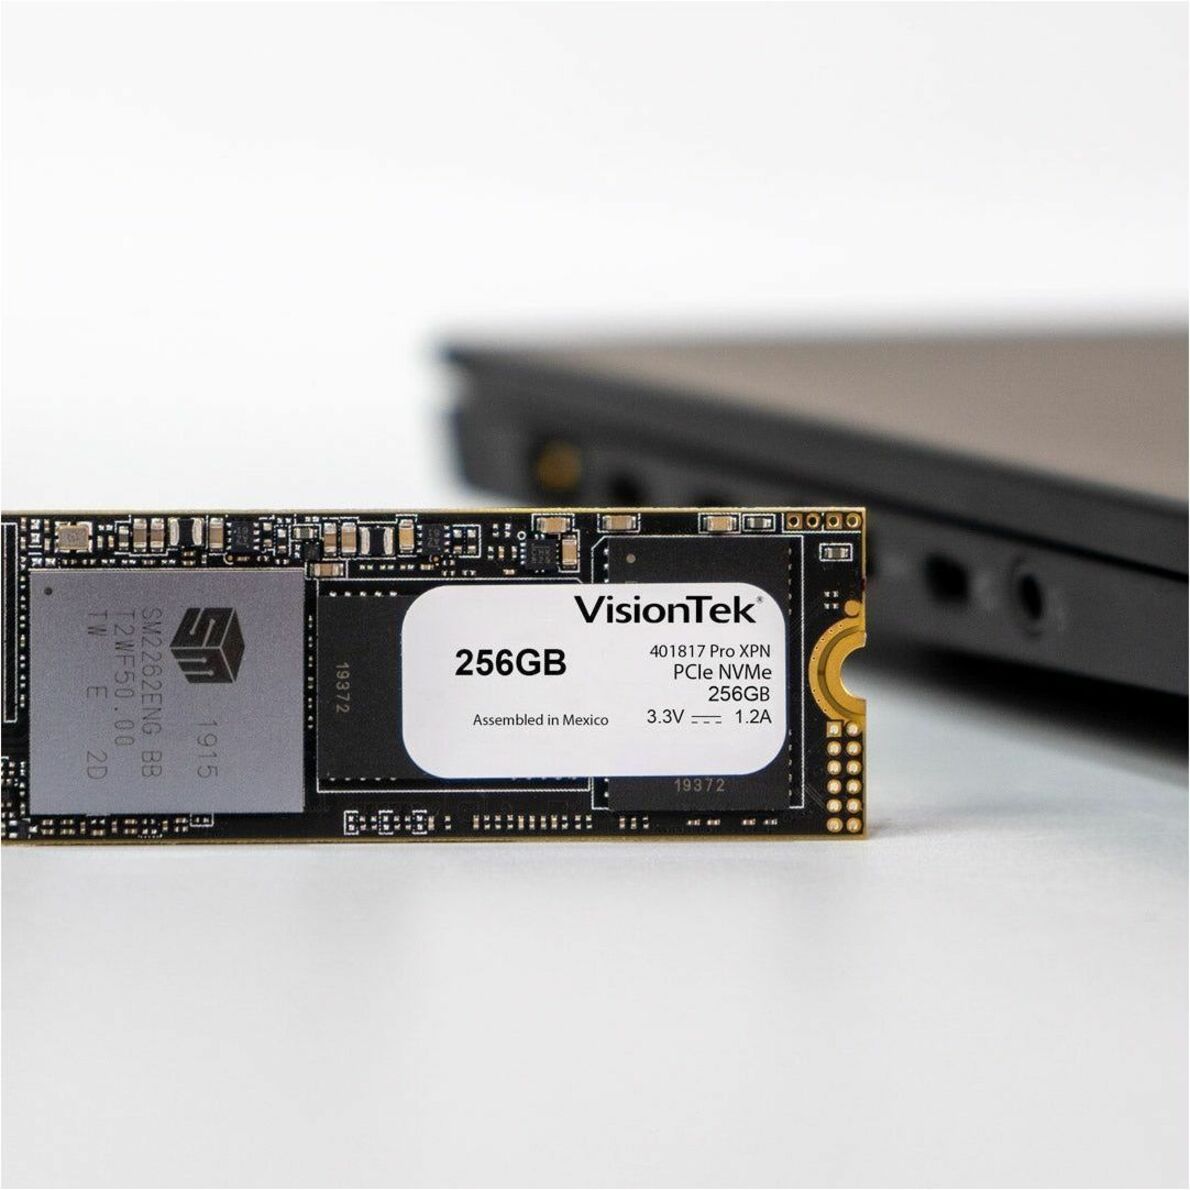 VisionTek 901305 PRO XPN M.2 NVMe SSD, 256GB Solid State Drive